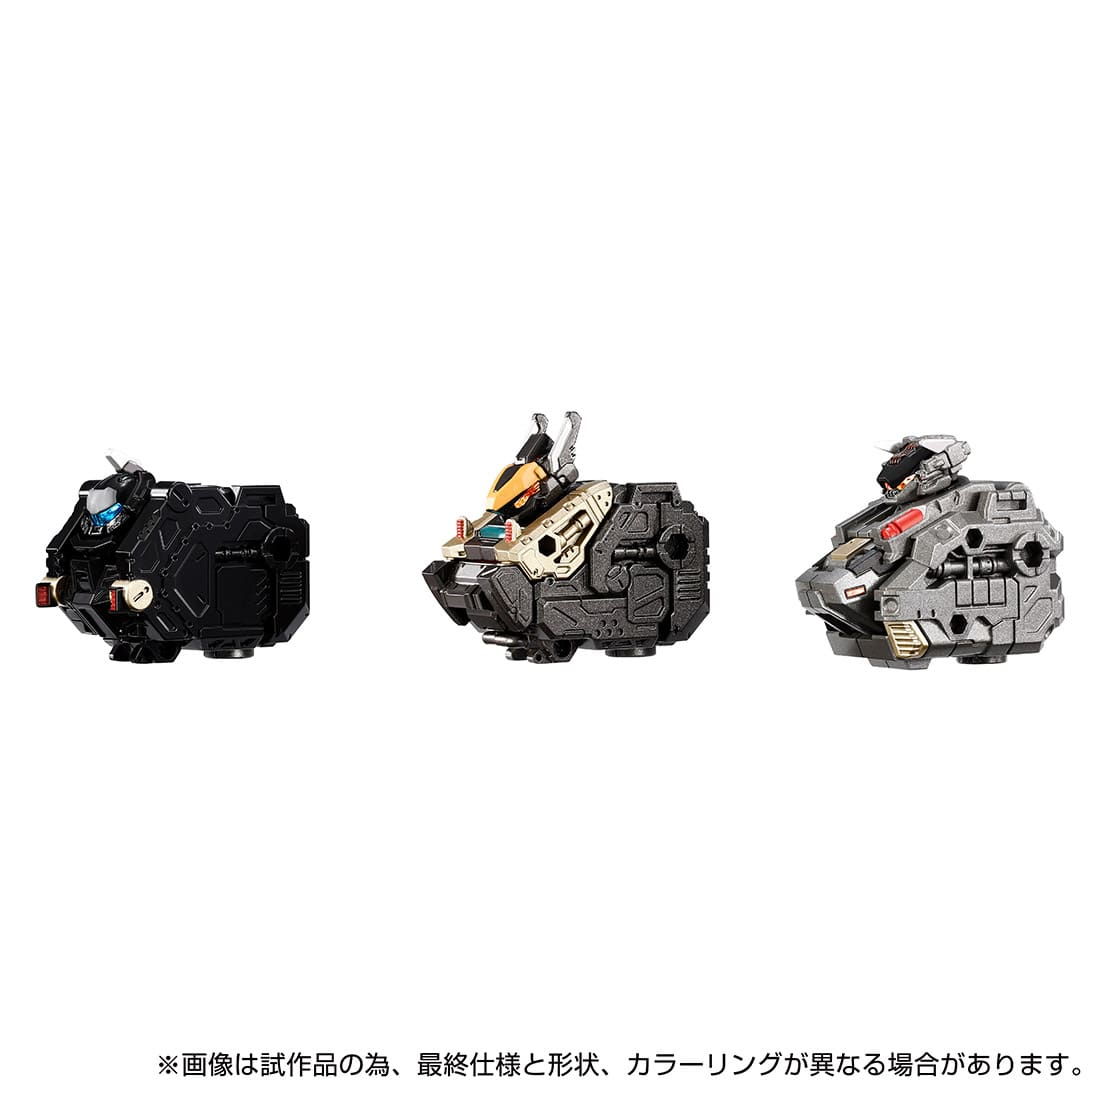  Takara Tommy dia k long EX core & armor men to set 1 returned goods kind another B